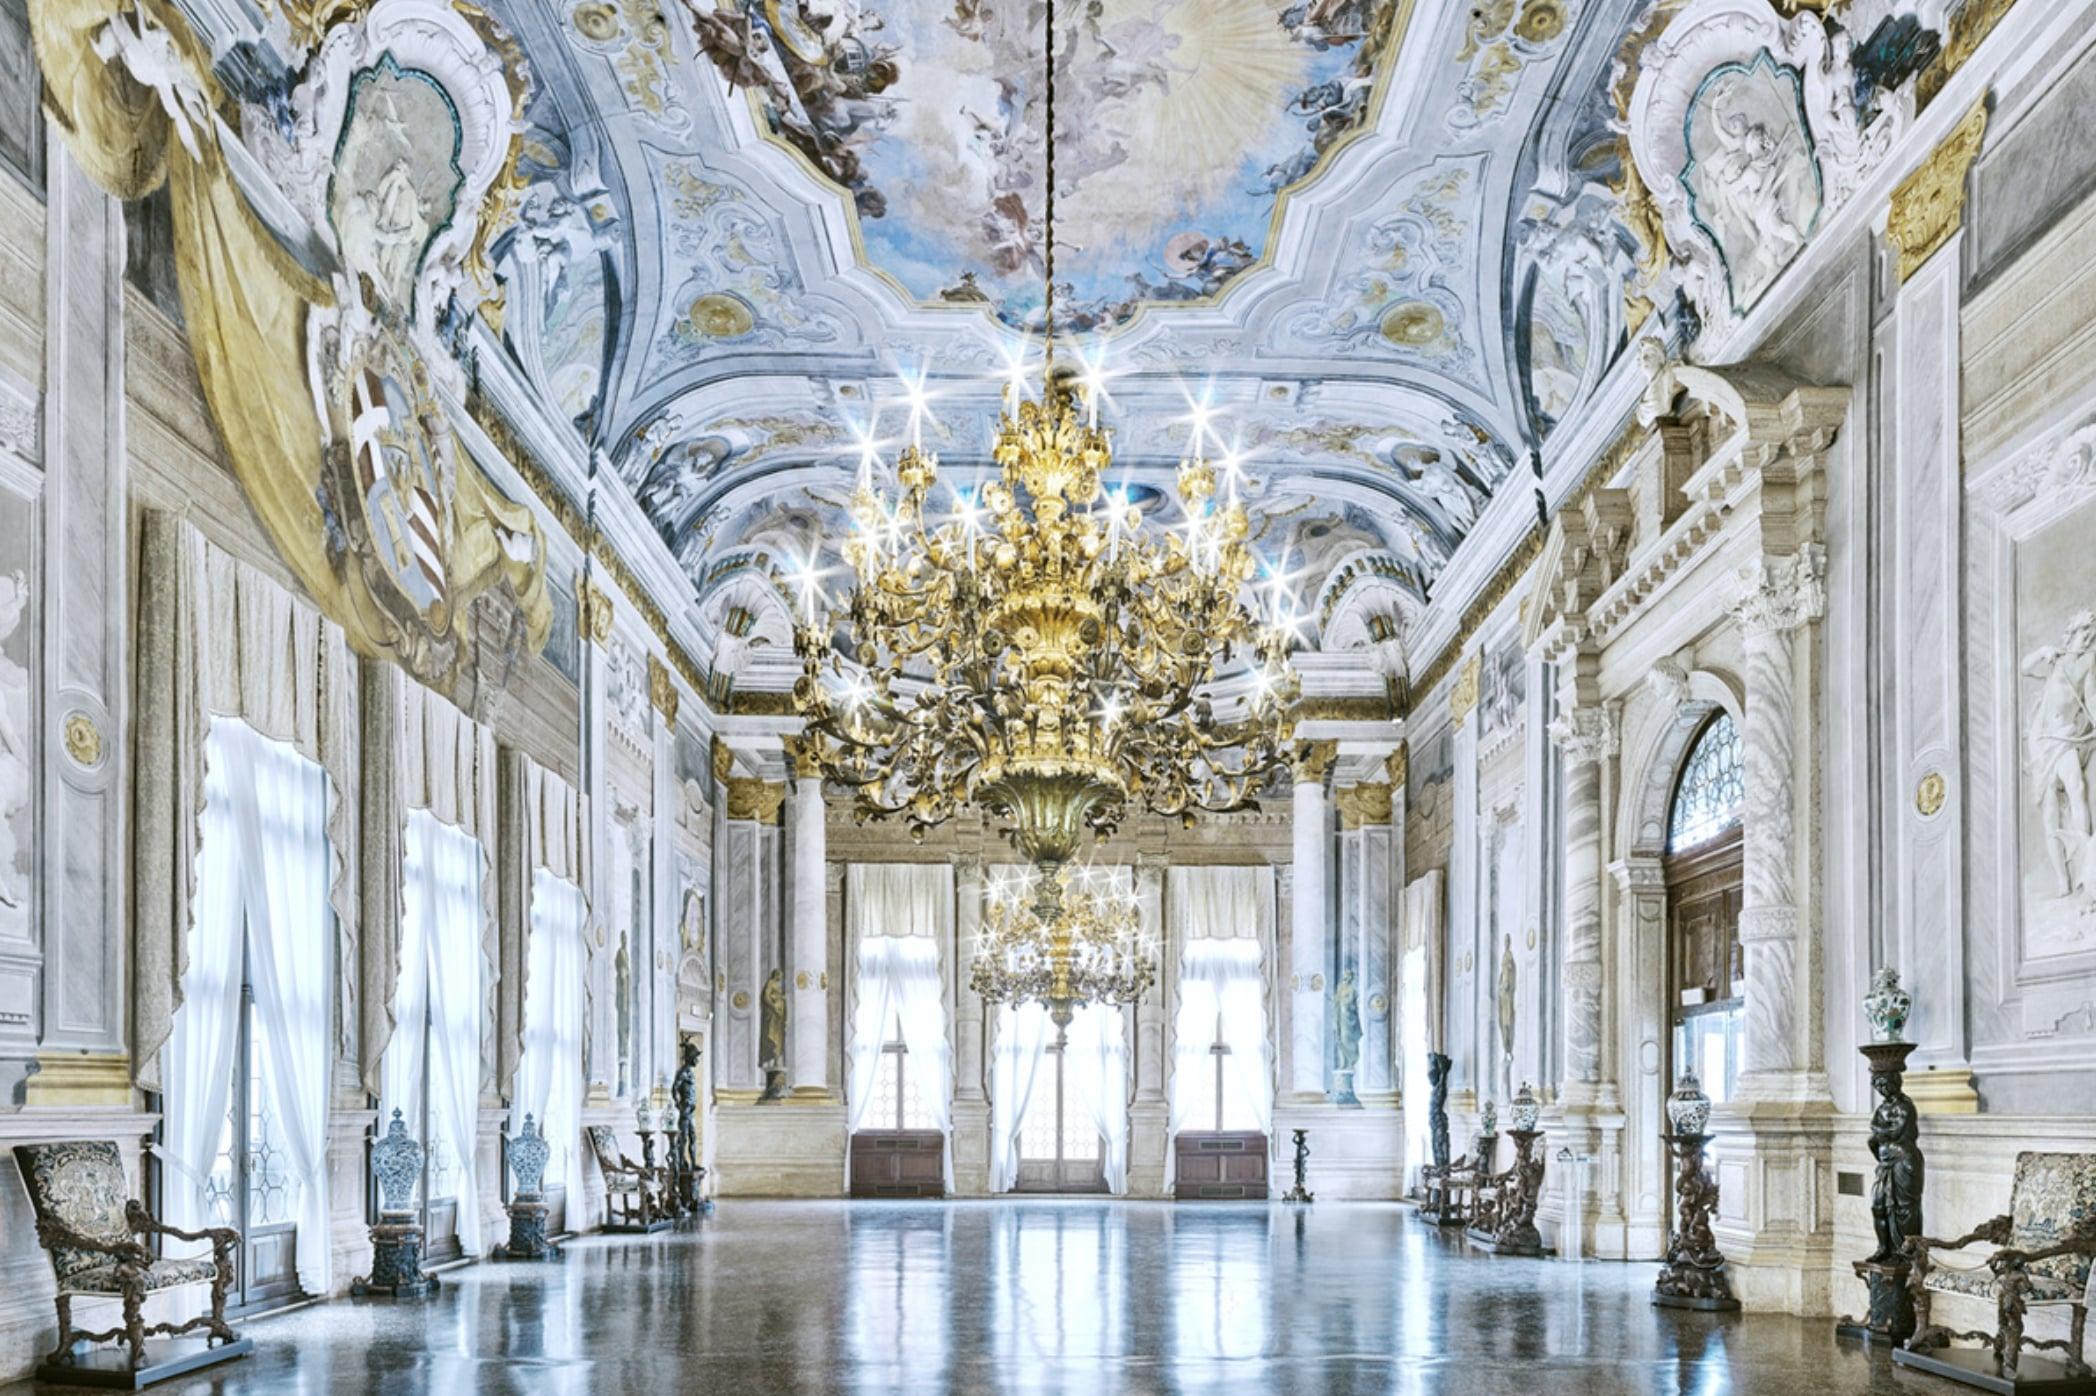 All available sizes & editions for each size of this photograph:
21” x 32" Edition of 4
32” x 48" Edition of 7
44” x 66” Edition of 10

While the spaces themselves are ornate and traditional, with Burdeny mirroring the vantage points of Renaissance